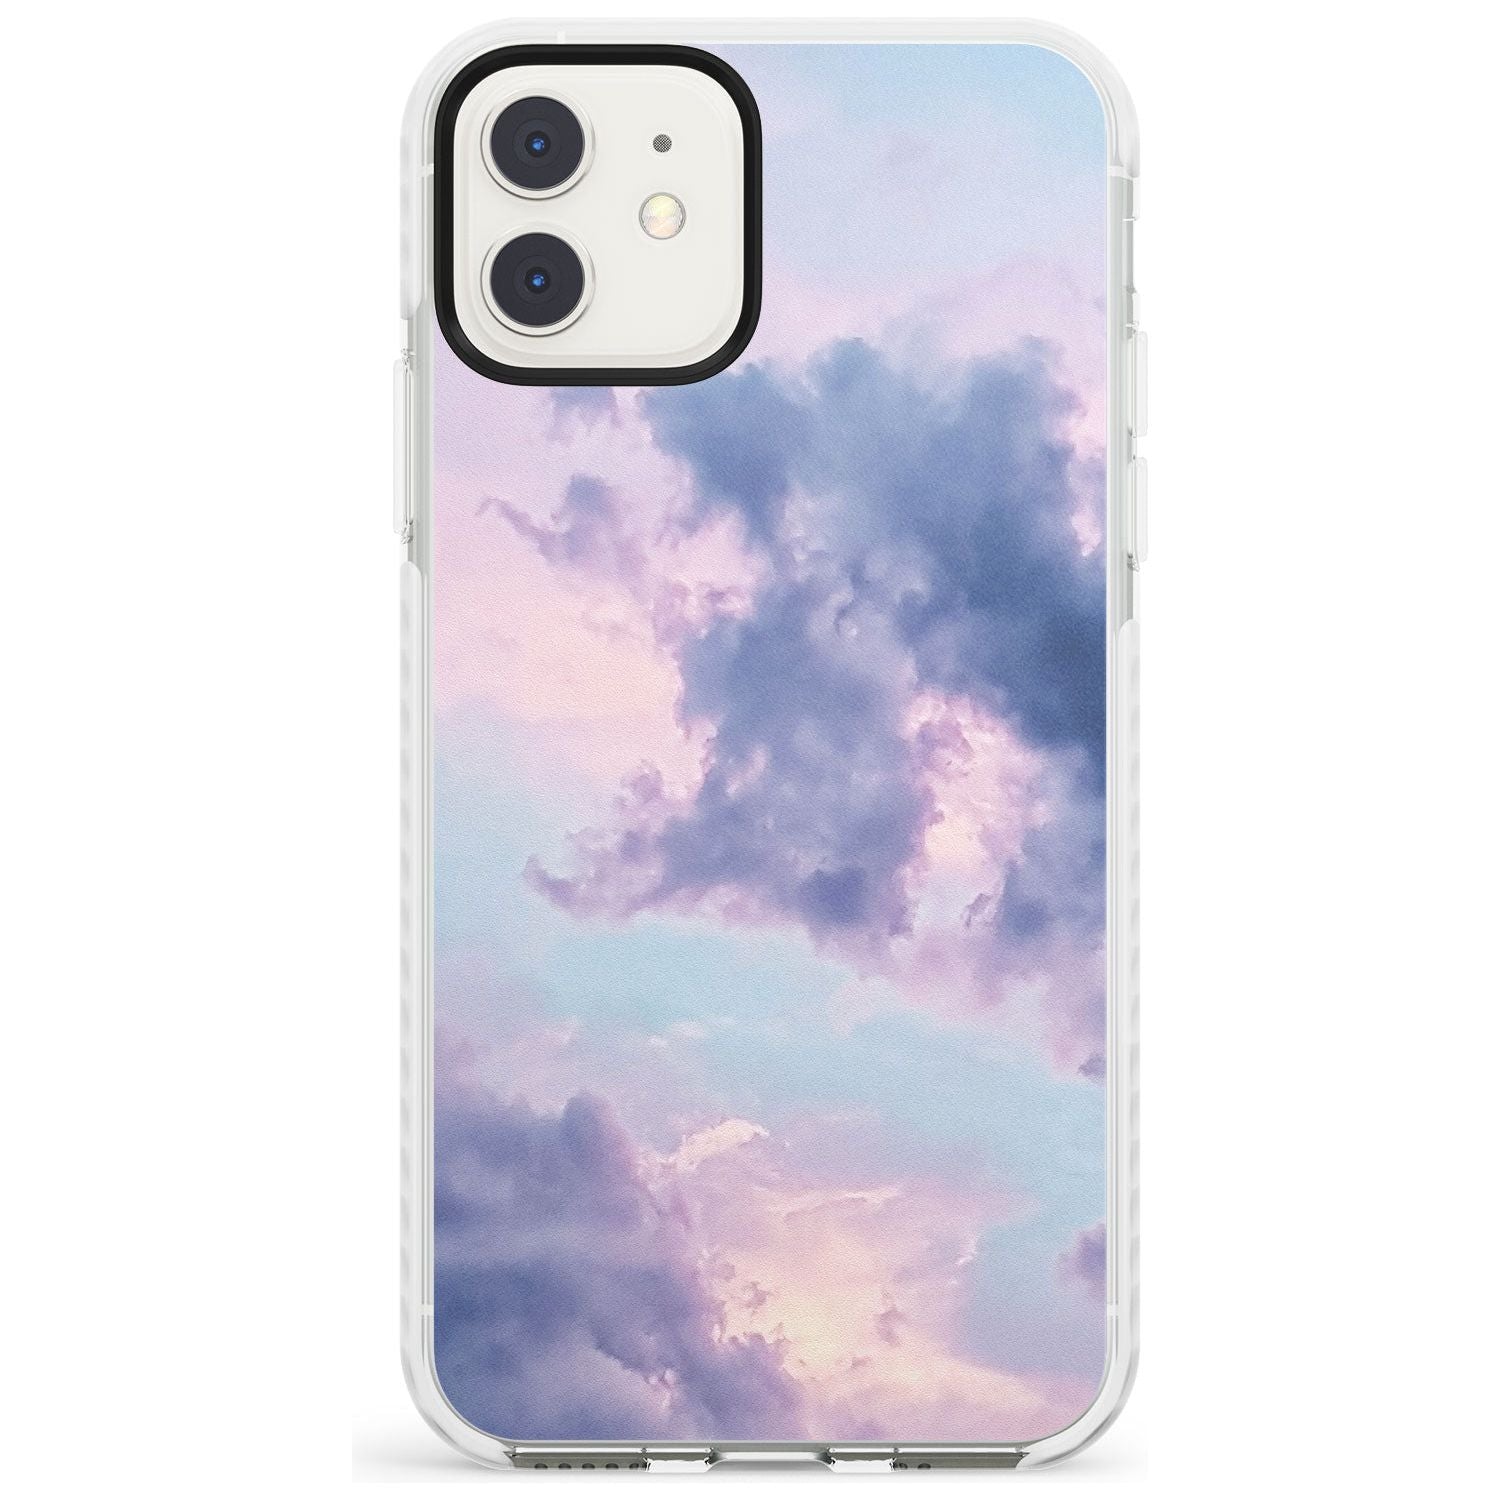 Purple Clouds Photograph Impact Phone Case for iPhone 11